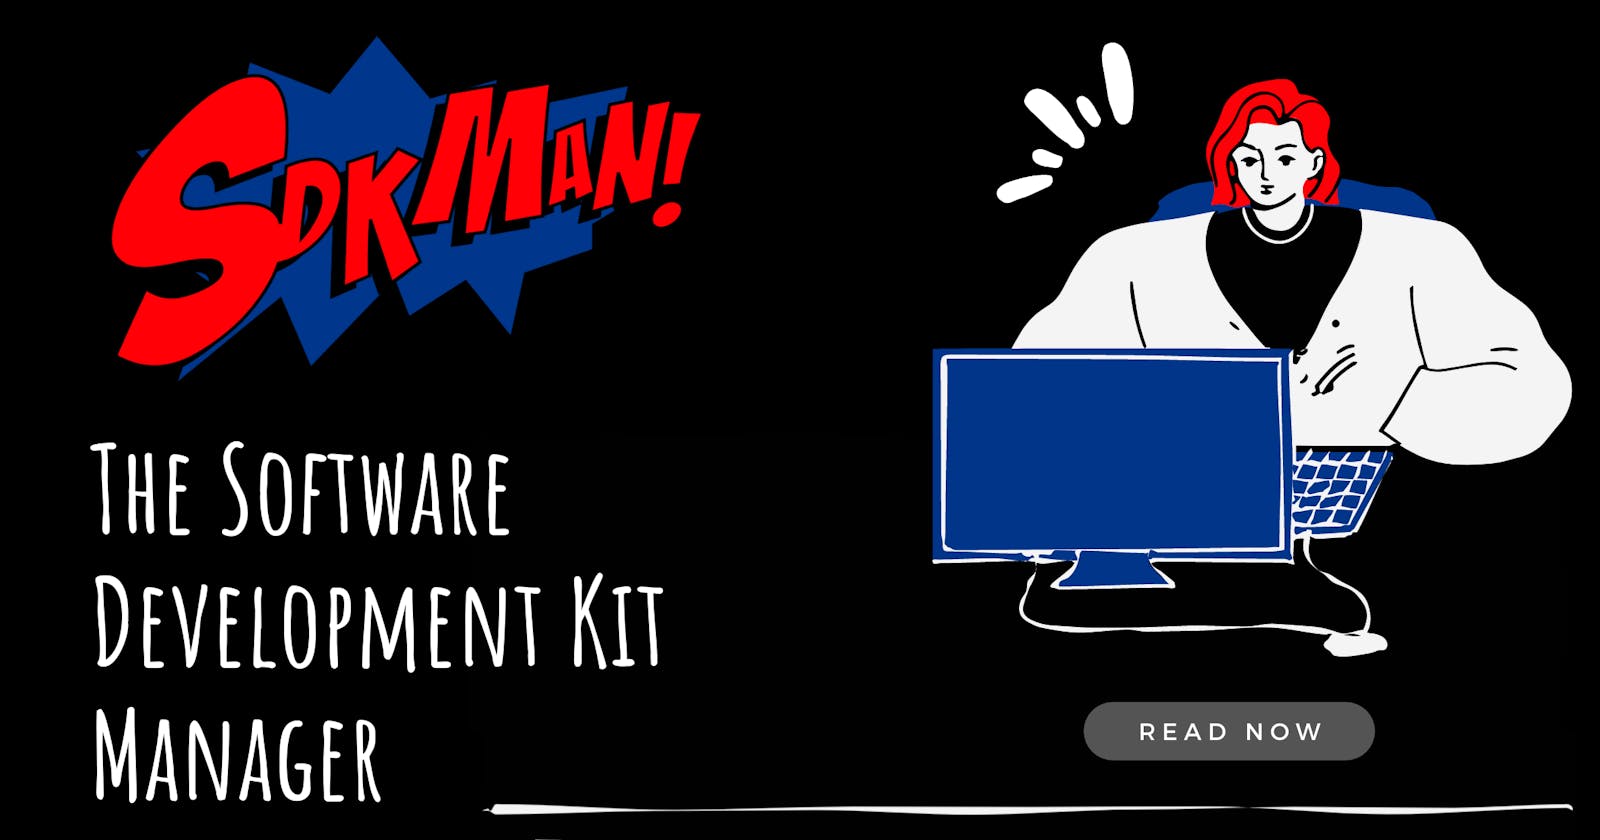 SDKMAN! The Software Development Kit Manager